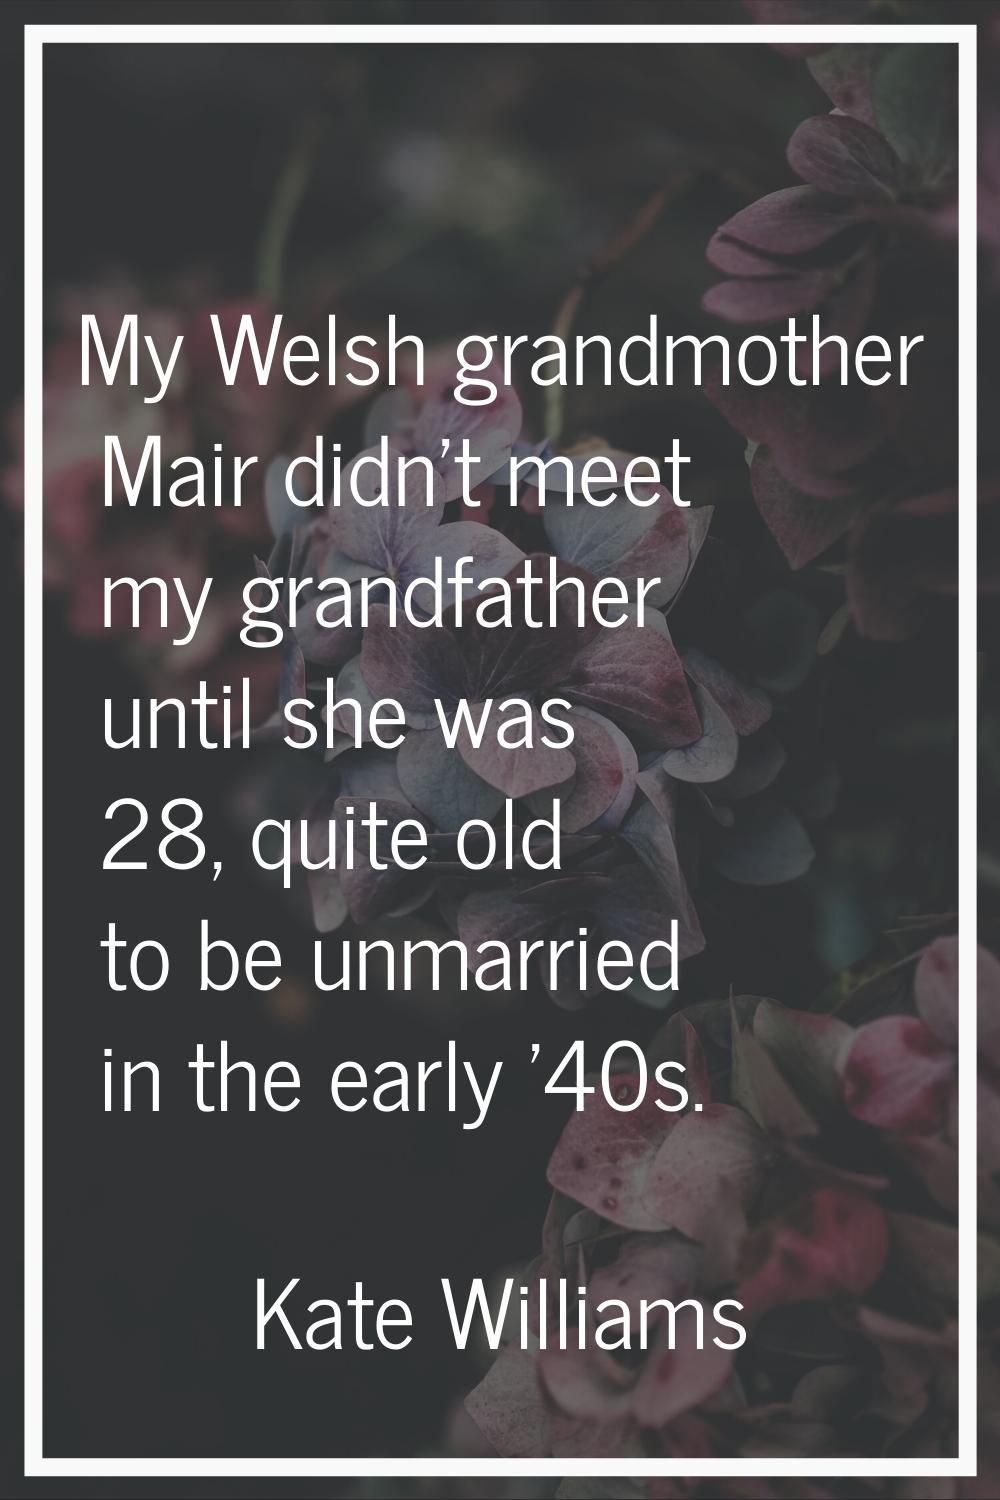 My Welsh grandmother Mair didn't meet my grandfather until she was 28, quite old to be unmarried in